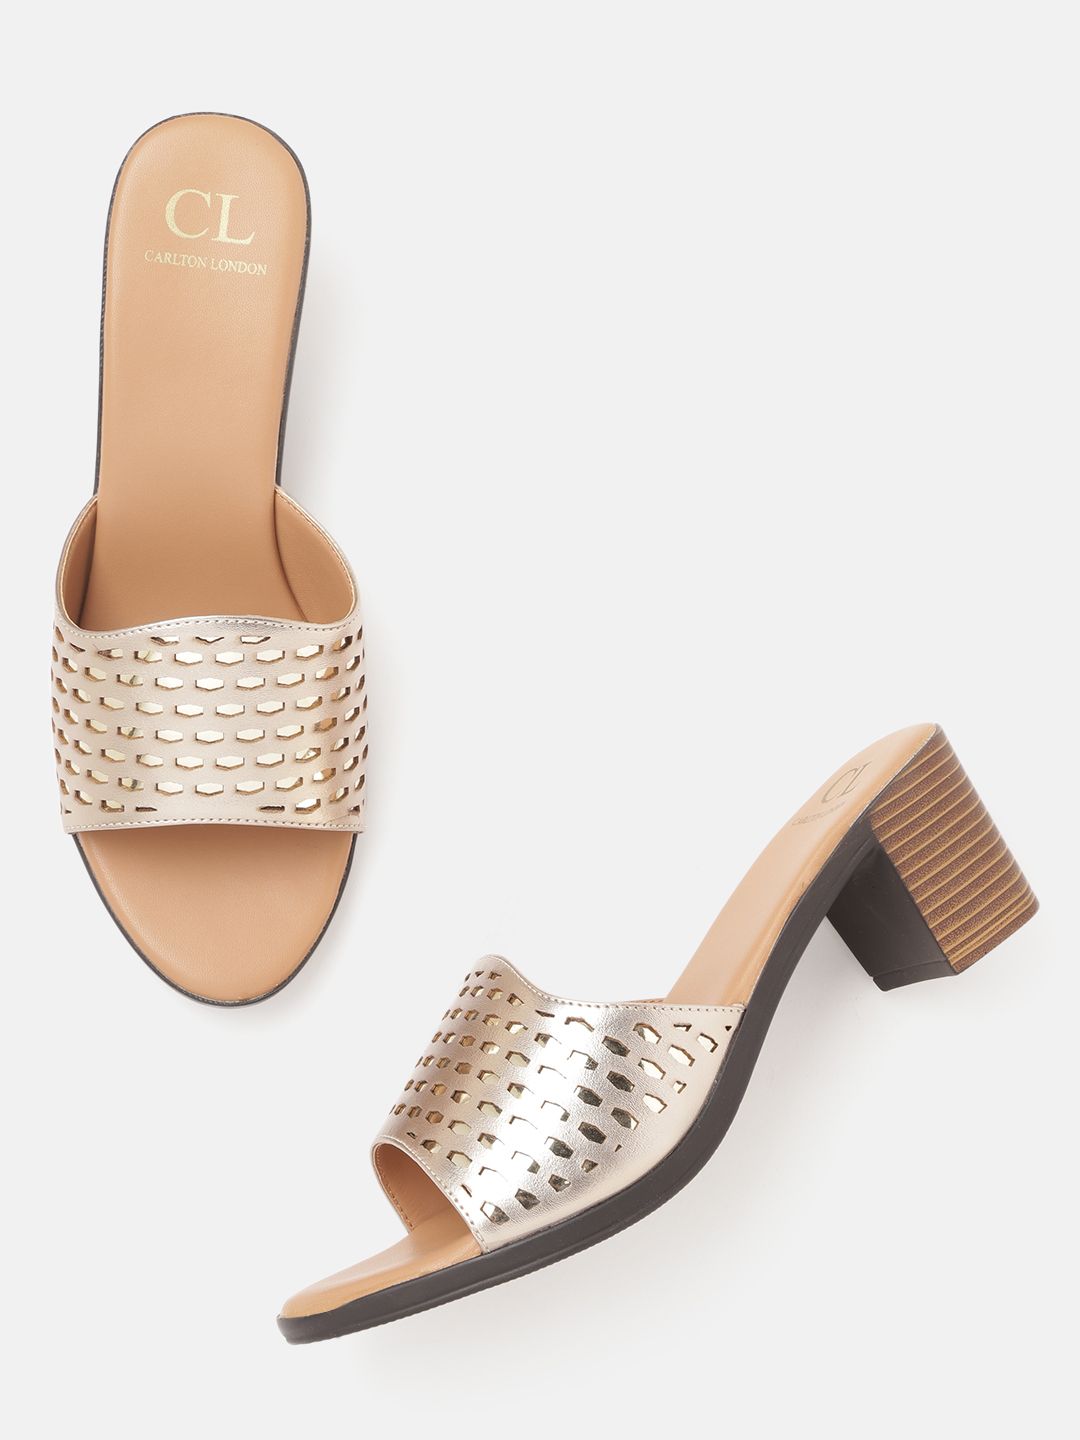 Carlton London Muted Gold-Toned Laser Cuts Block Heels Price in India